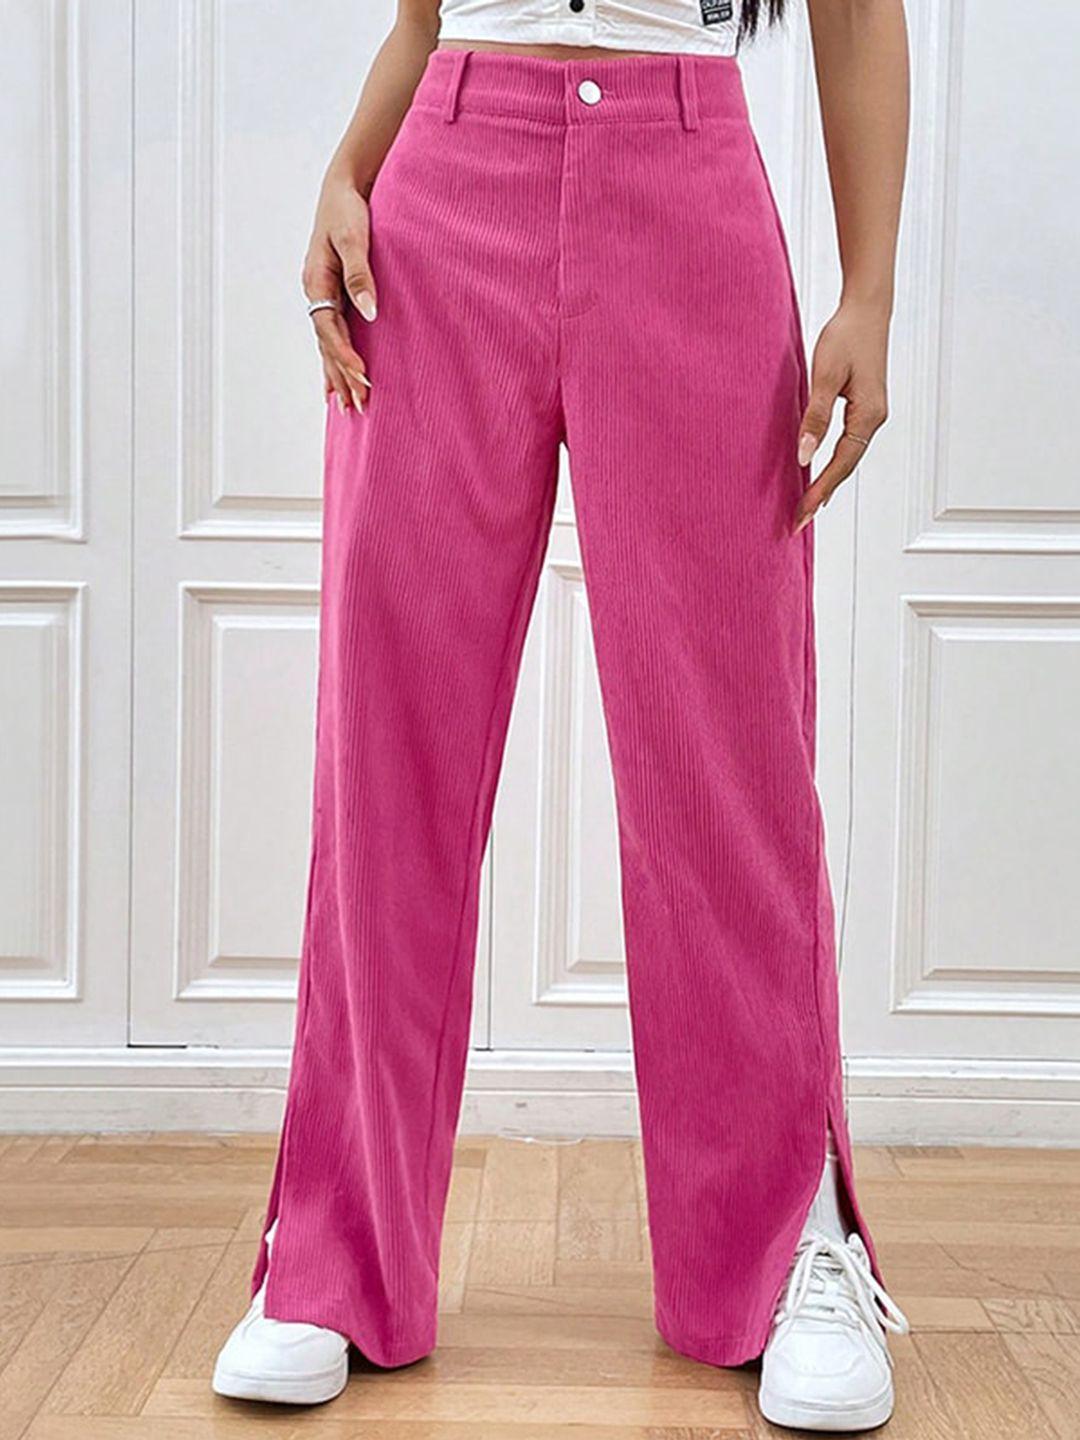 stylecast women pink high-rise trousers